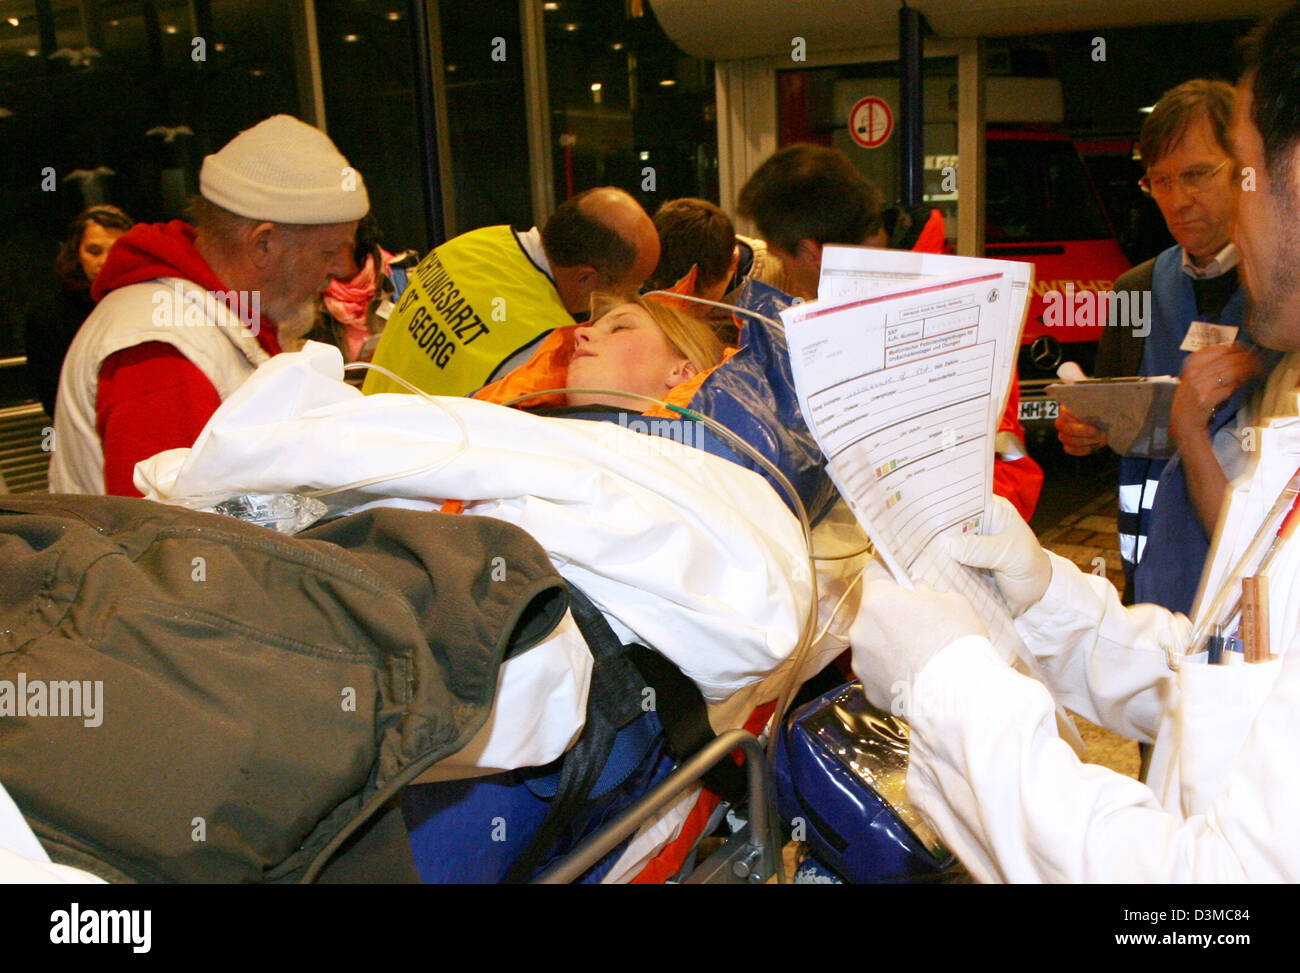 Rescue forces take care of 'injured' participants of an hospital disaster drill in Hamburg, Germany, 25 January 2006. The scenario for the practise conformed to 50 injured people after two bombings in Hamburg. According to the local health authority terrorist bombings in two public-transport busses were assumed. The bombs shall have been so-called dirty bombs unleashing radioactive Stock Photo